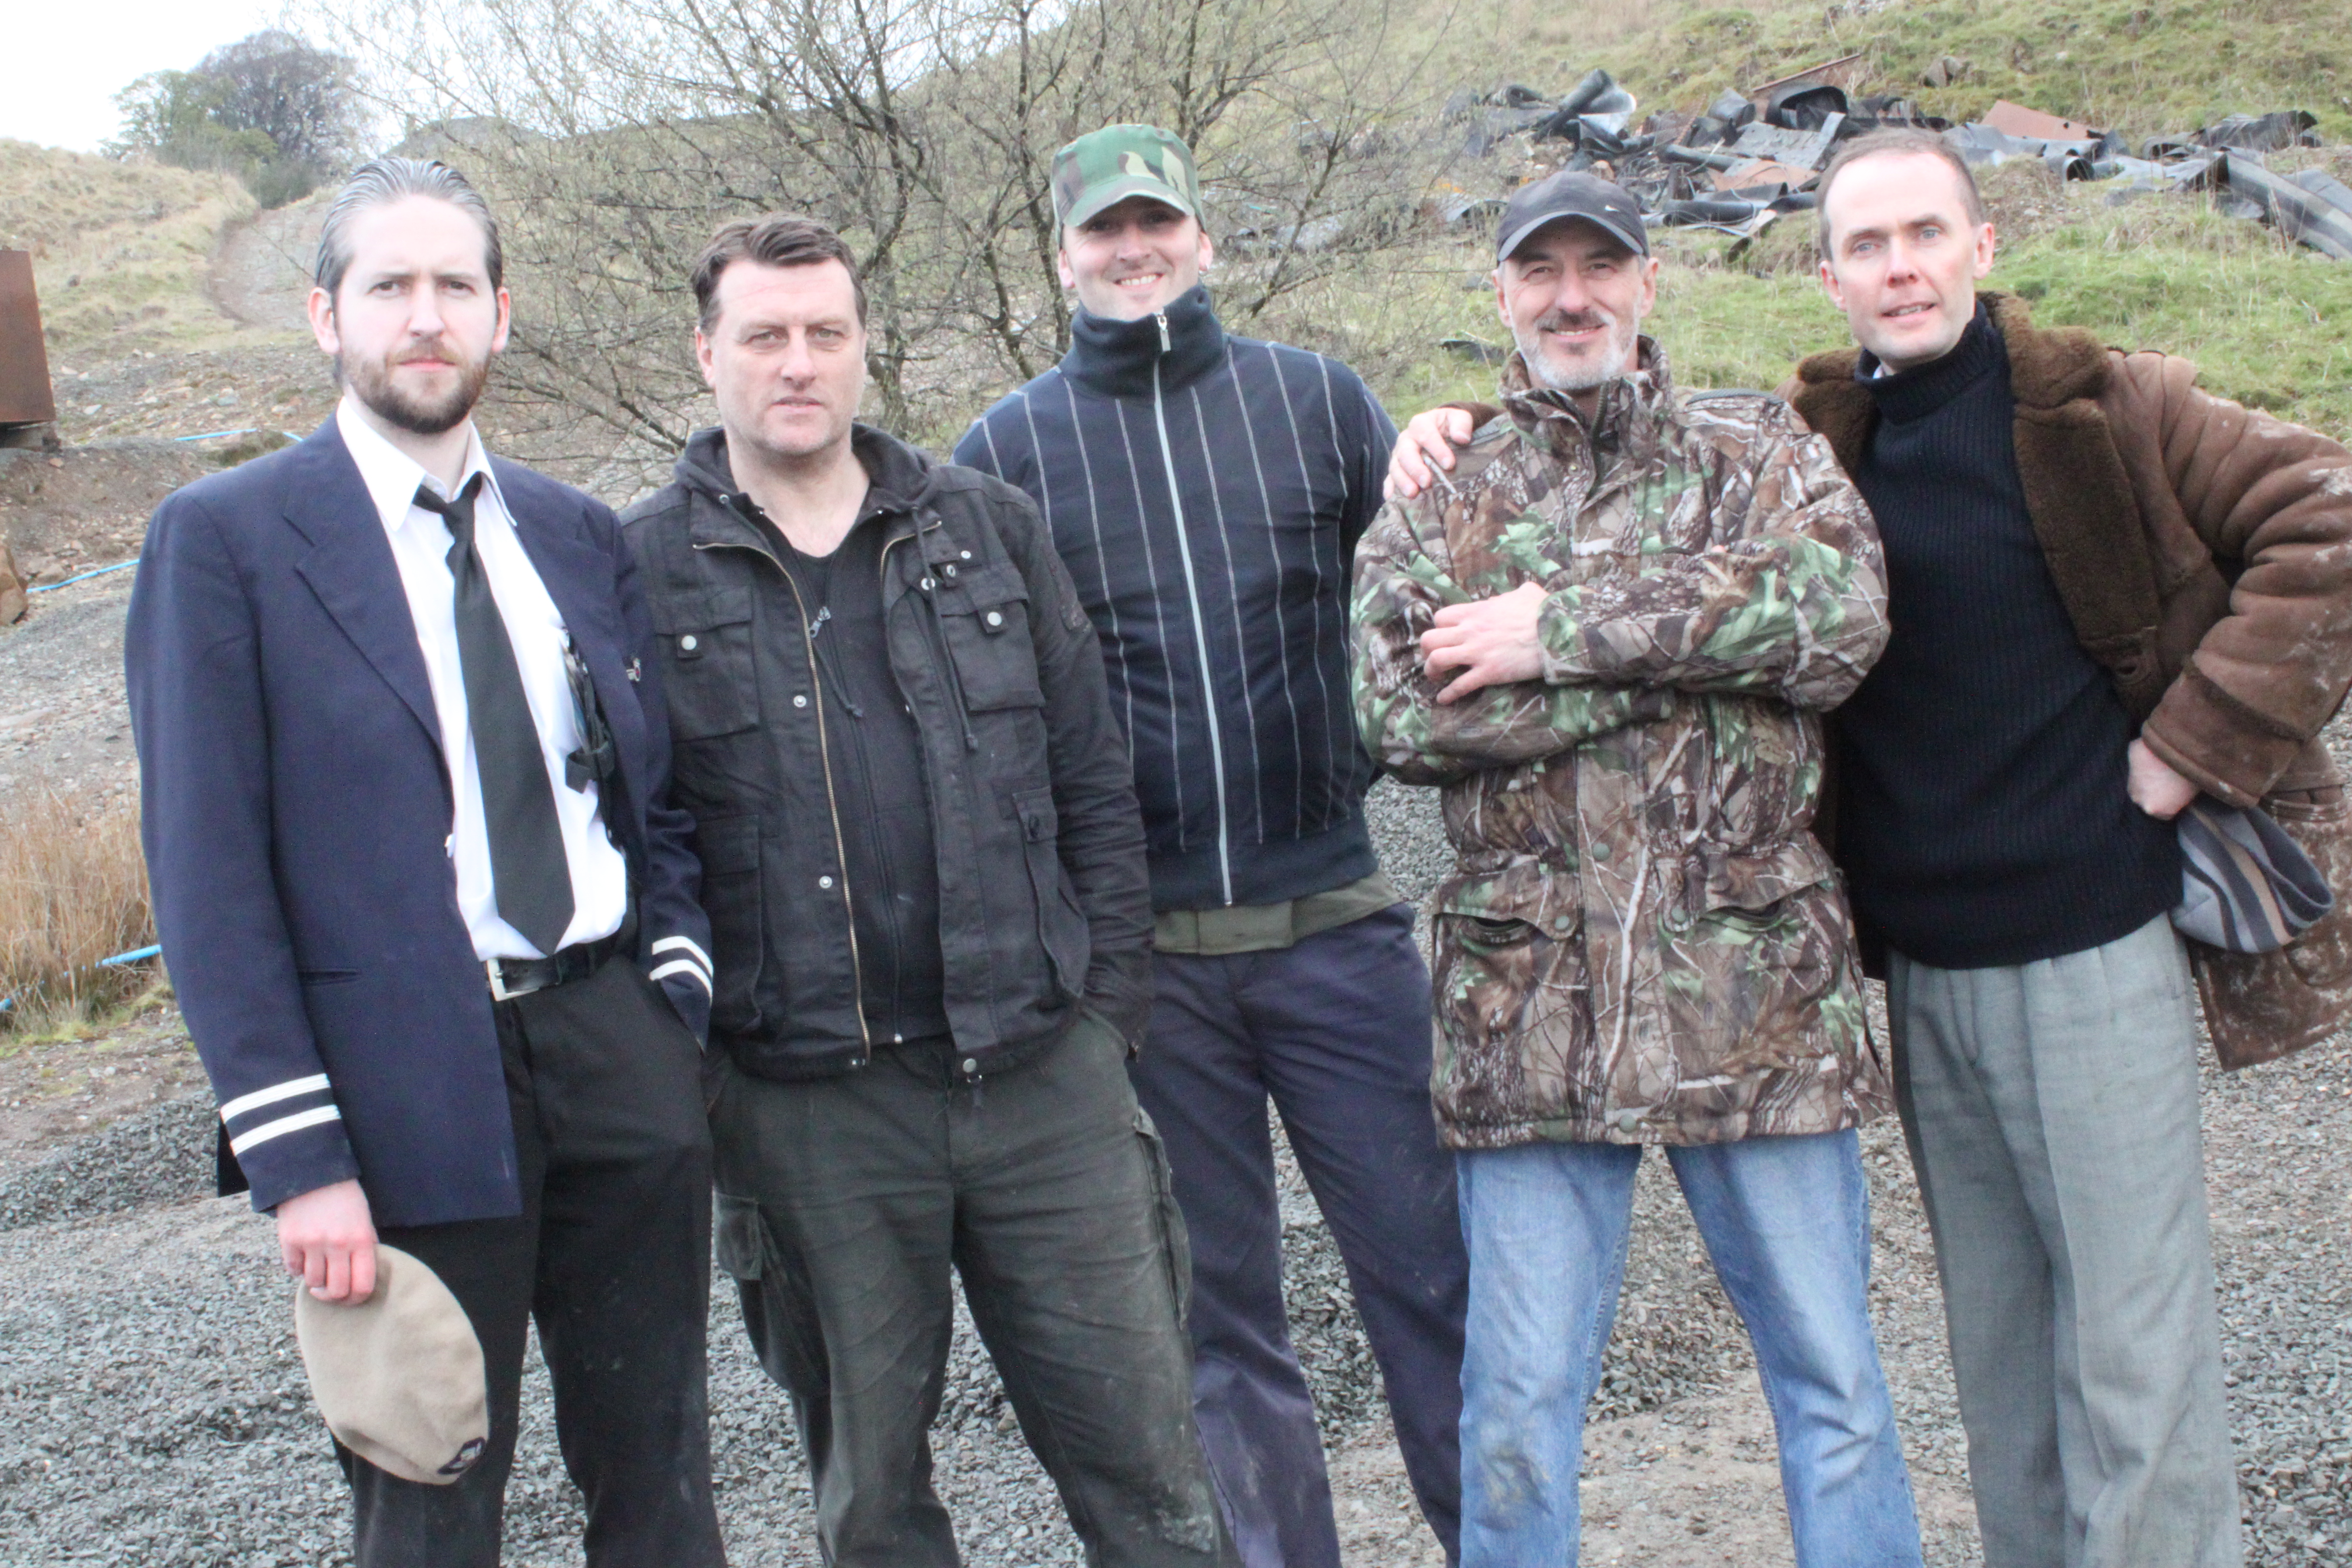 Peter Montgomery, Paul Hunter, Brook Finch, Ronnie B Goodwin, Ro J Goodwin. Some cast and crew of THE BLOOD (c)Rigar